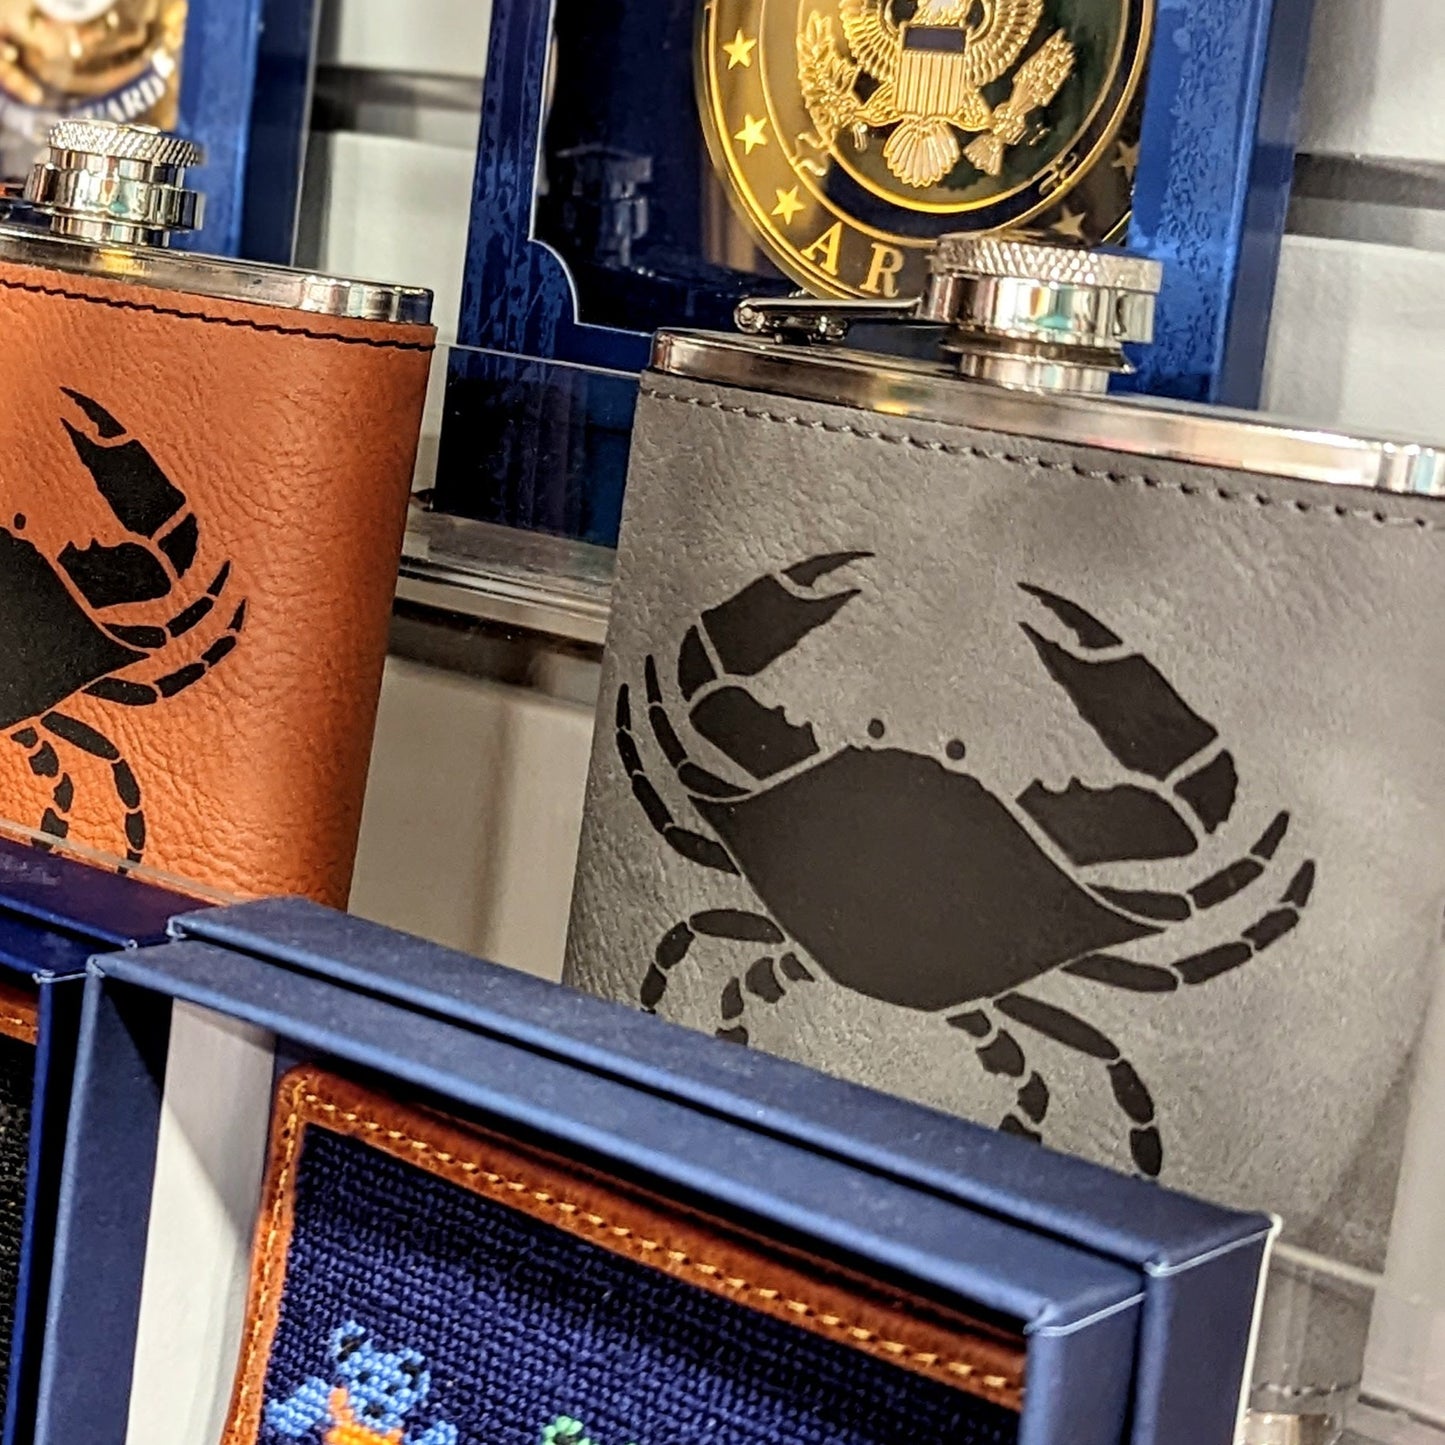 Leather Engraved Crab Flask | Grey